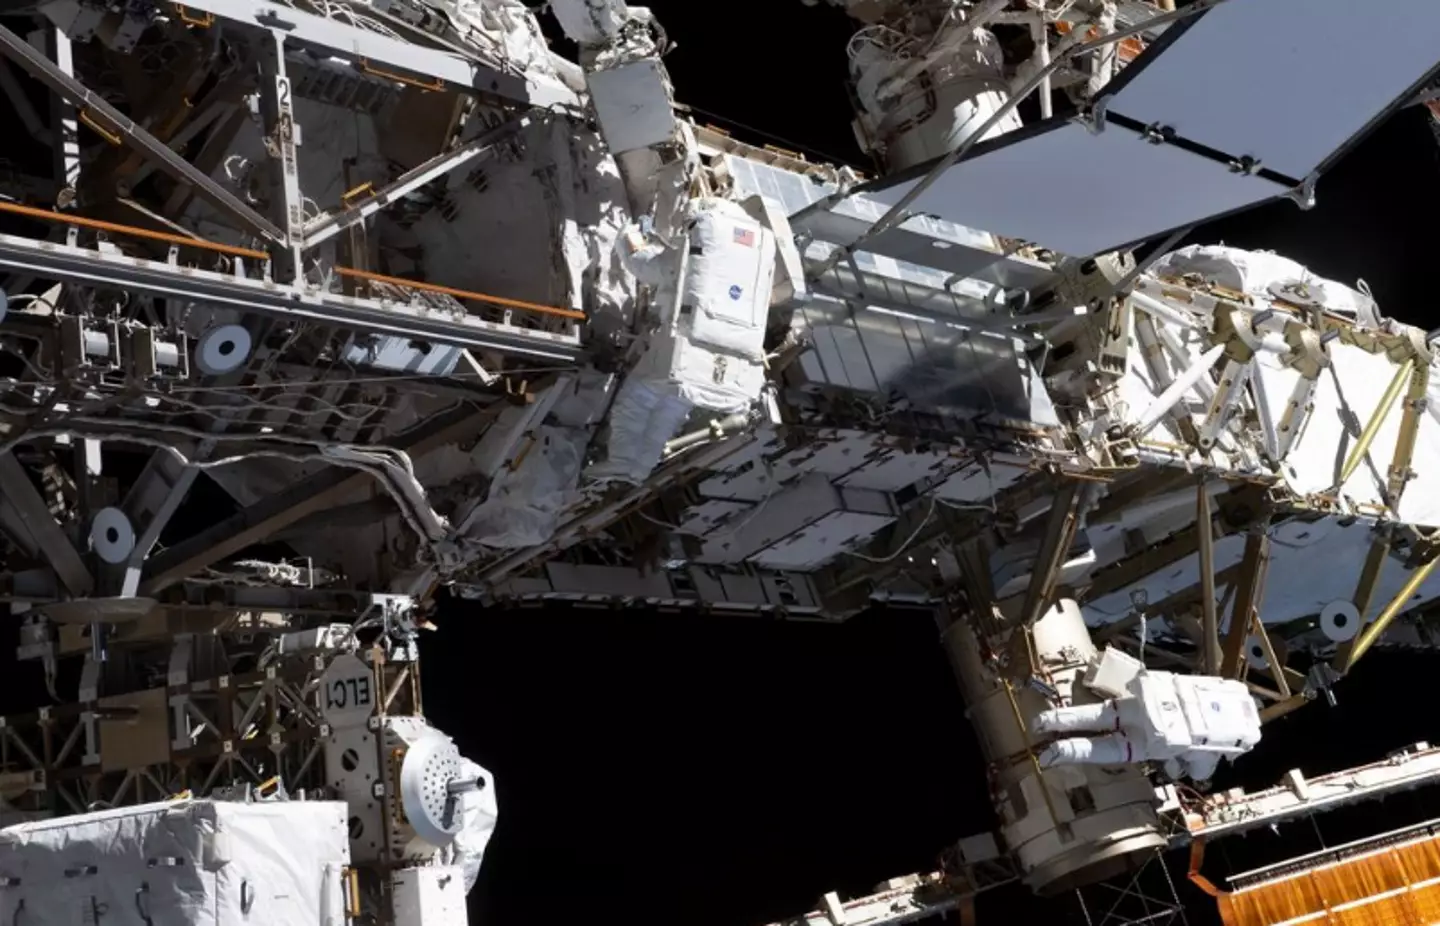 NASA said the tools 'were not needed for the remainder of the spacewalk'.